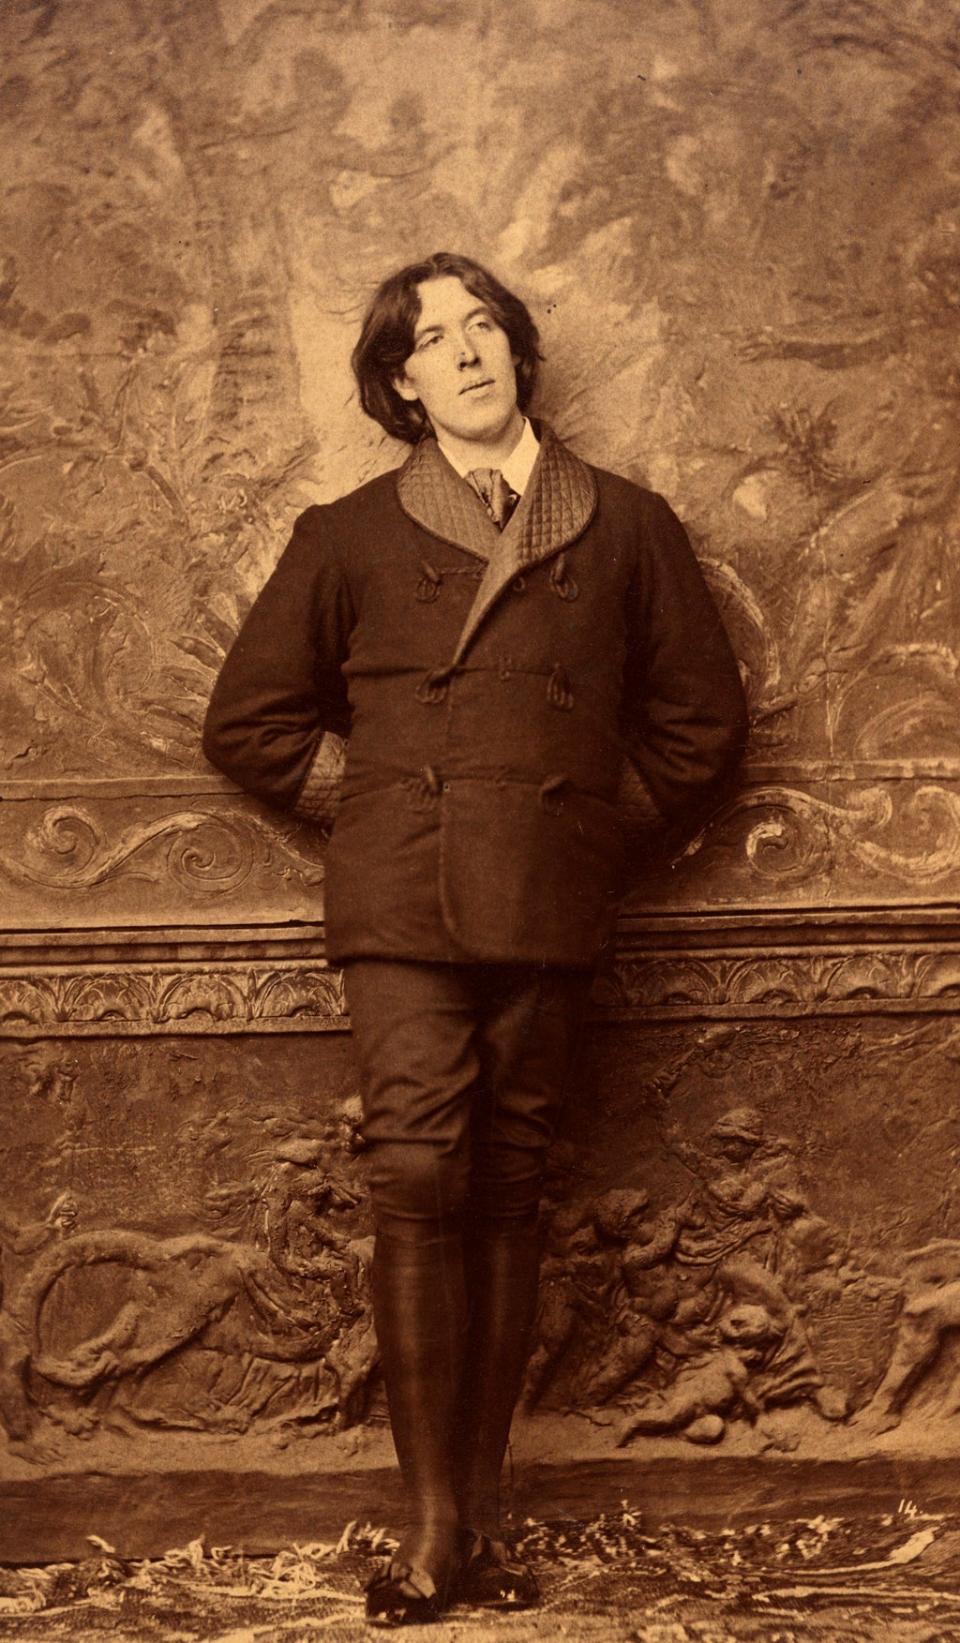 Oscar Wilde was incarcerated in the prison after being convicted of gross indecency for being gay (Matthew Bailey/National Portrait/PA) (PA Media)